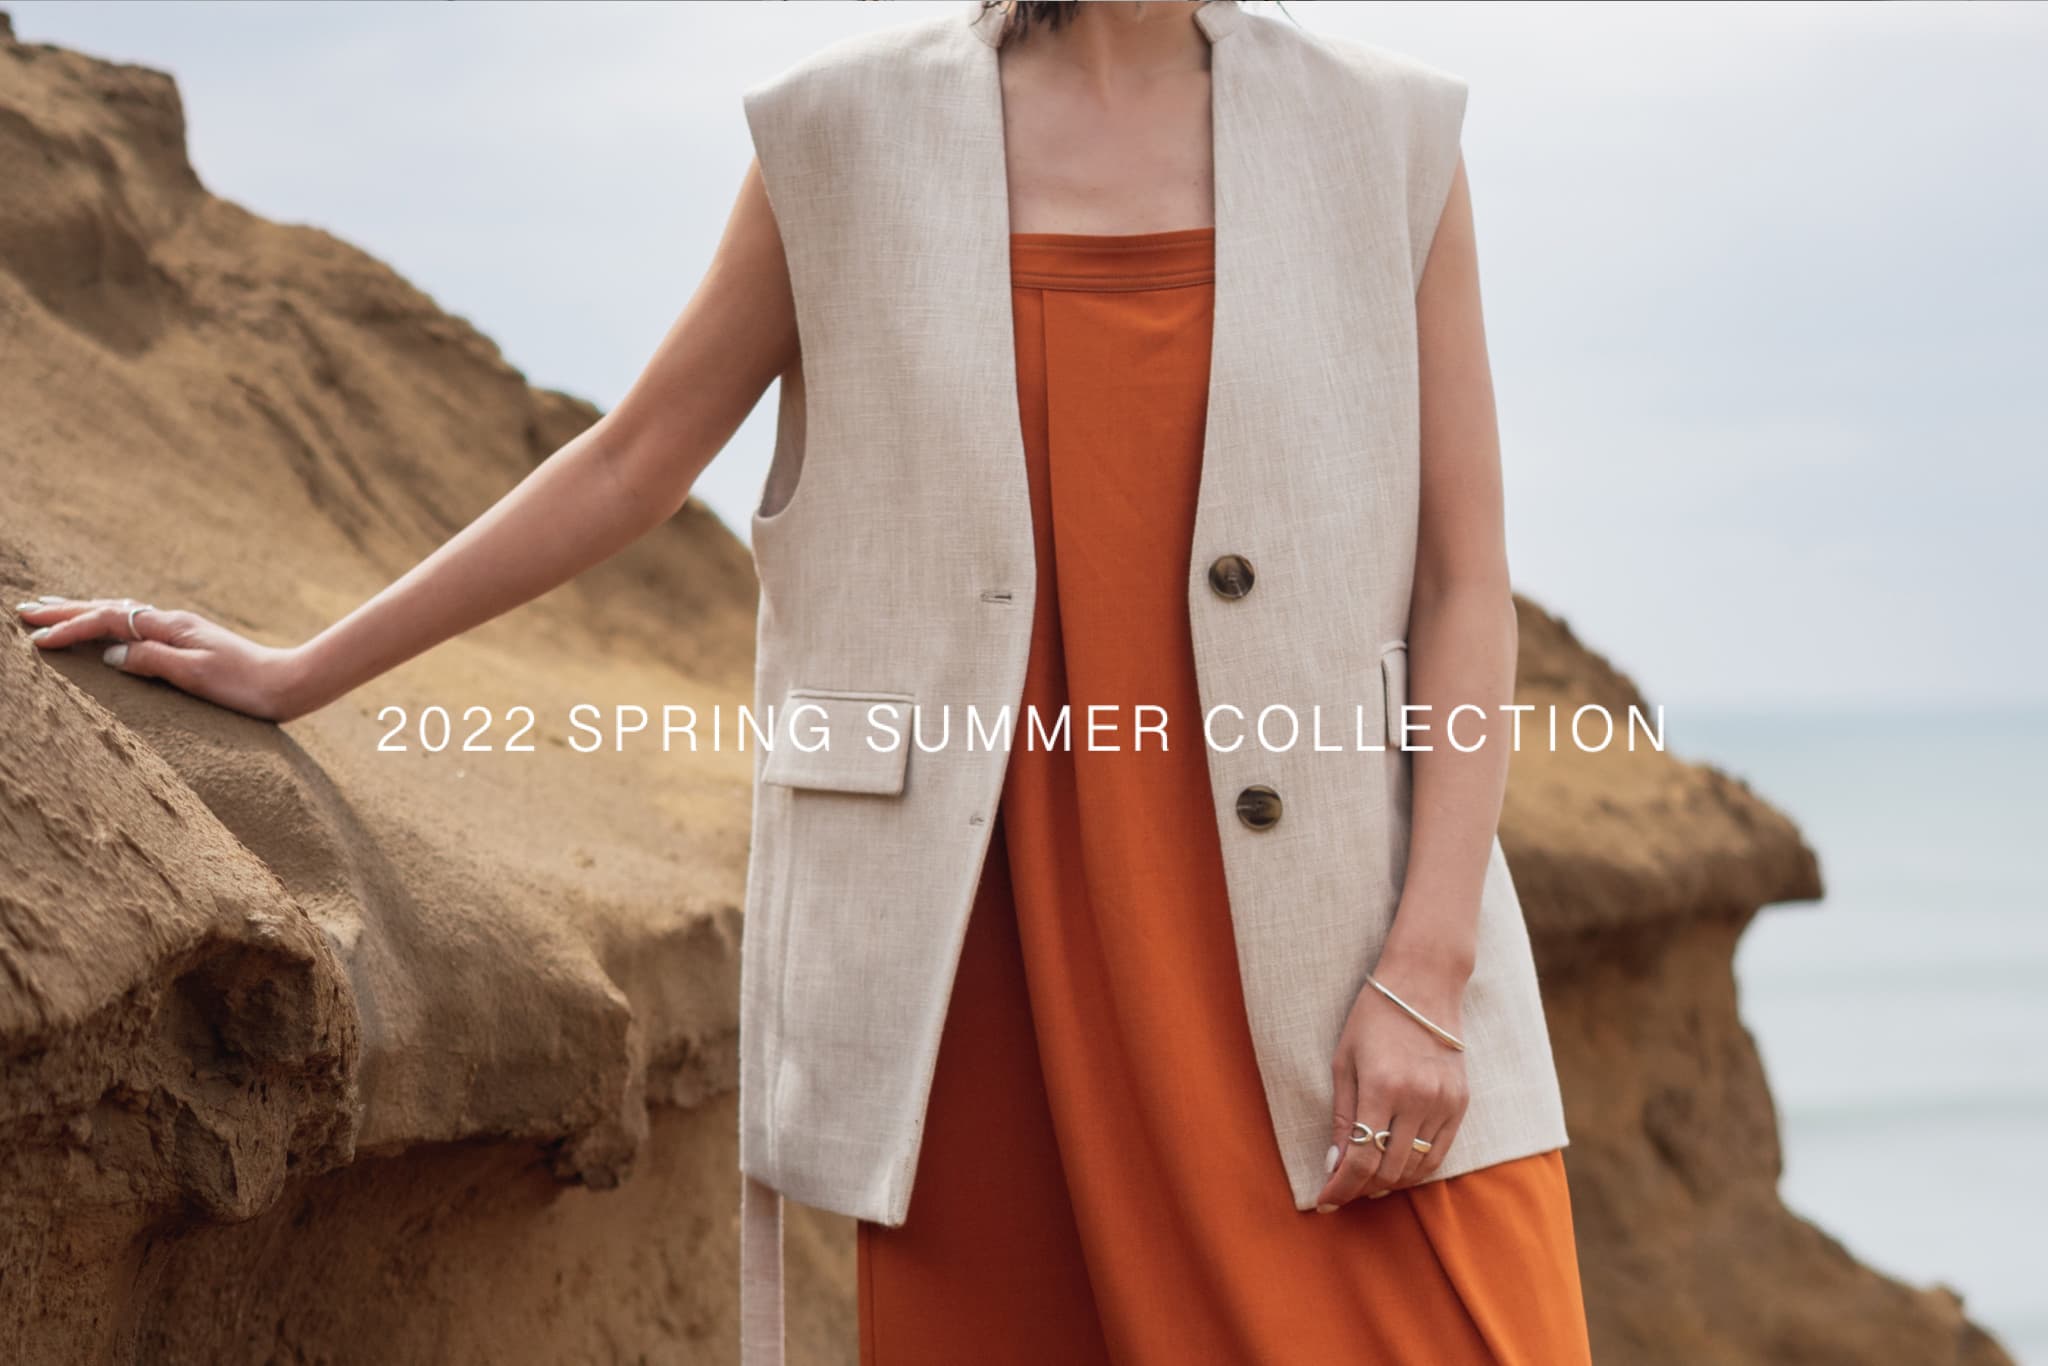 2022 SPRING SUMMER COLLECTION